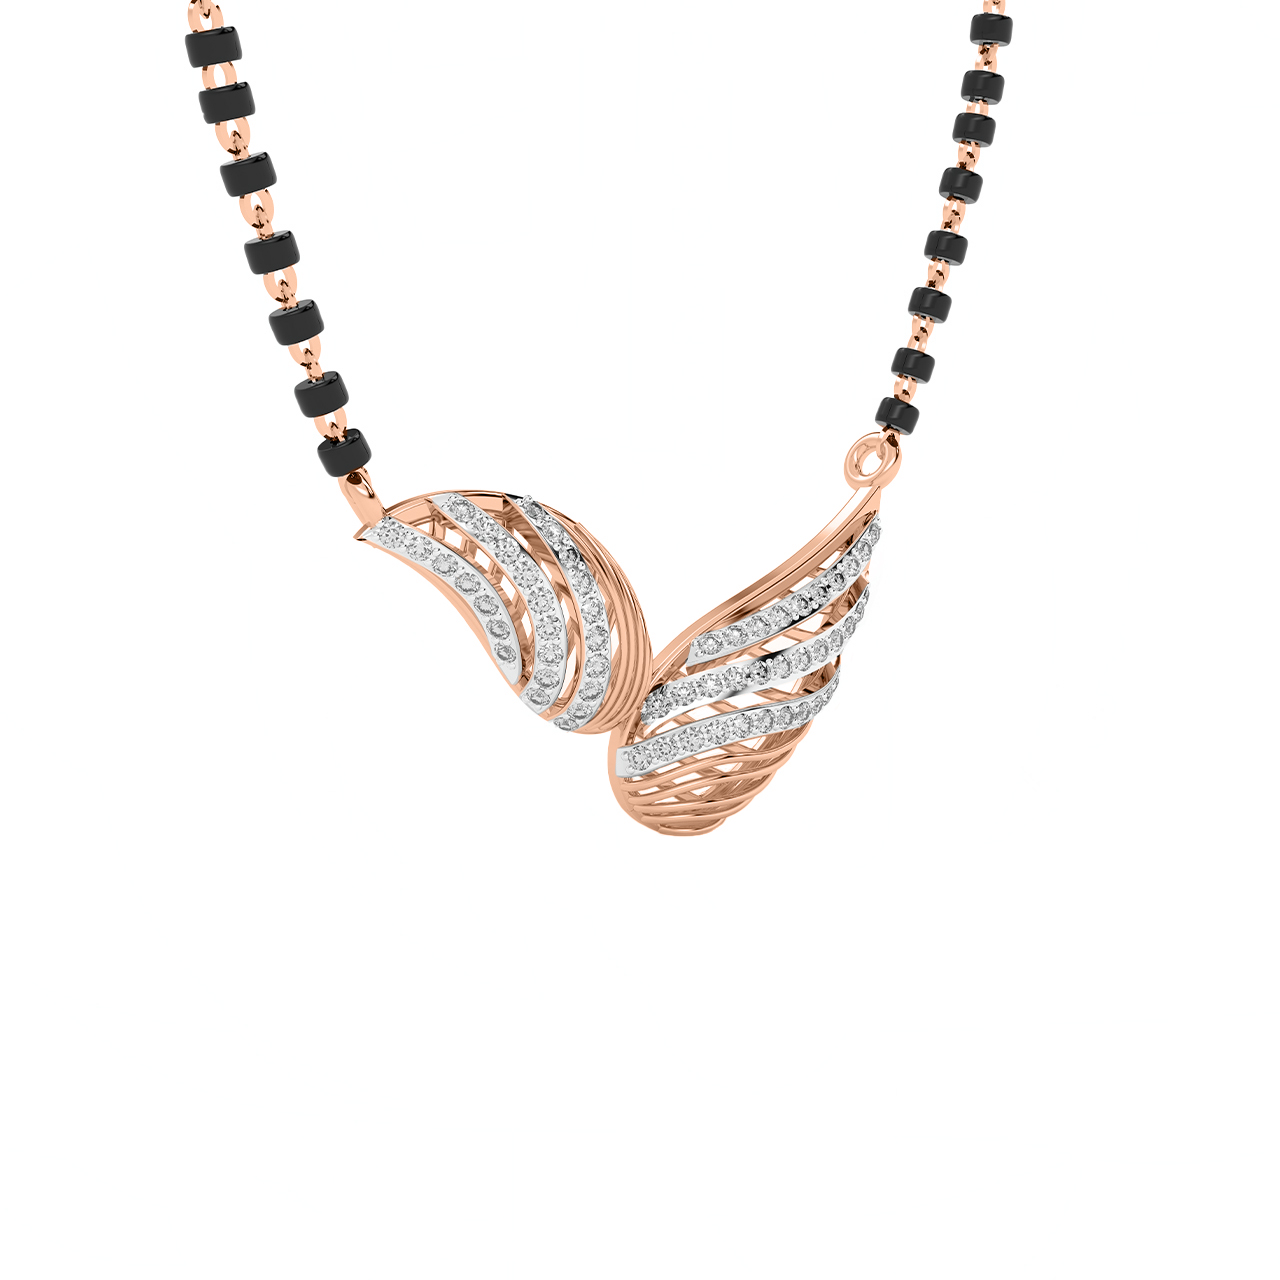 Shell Design Diamond Mangalsutra With Chain